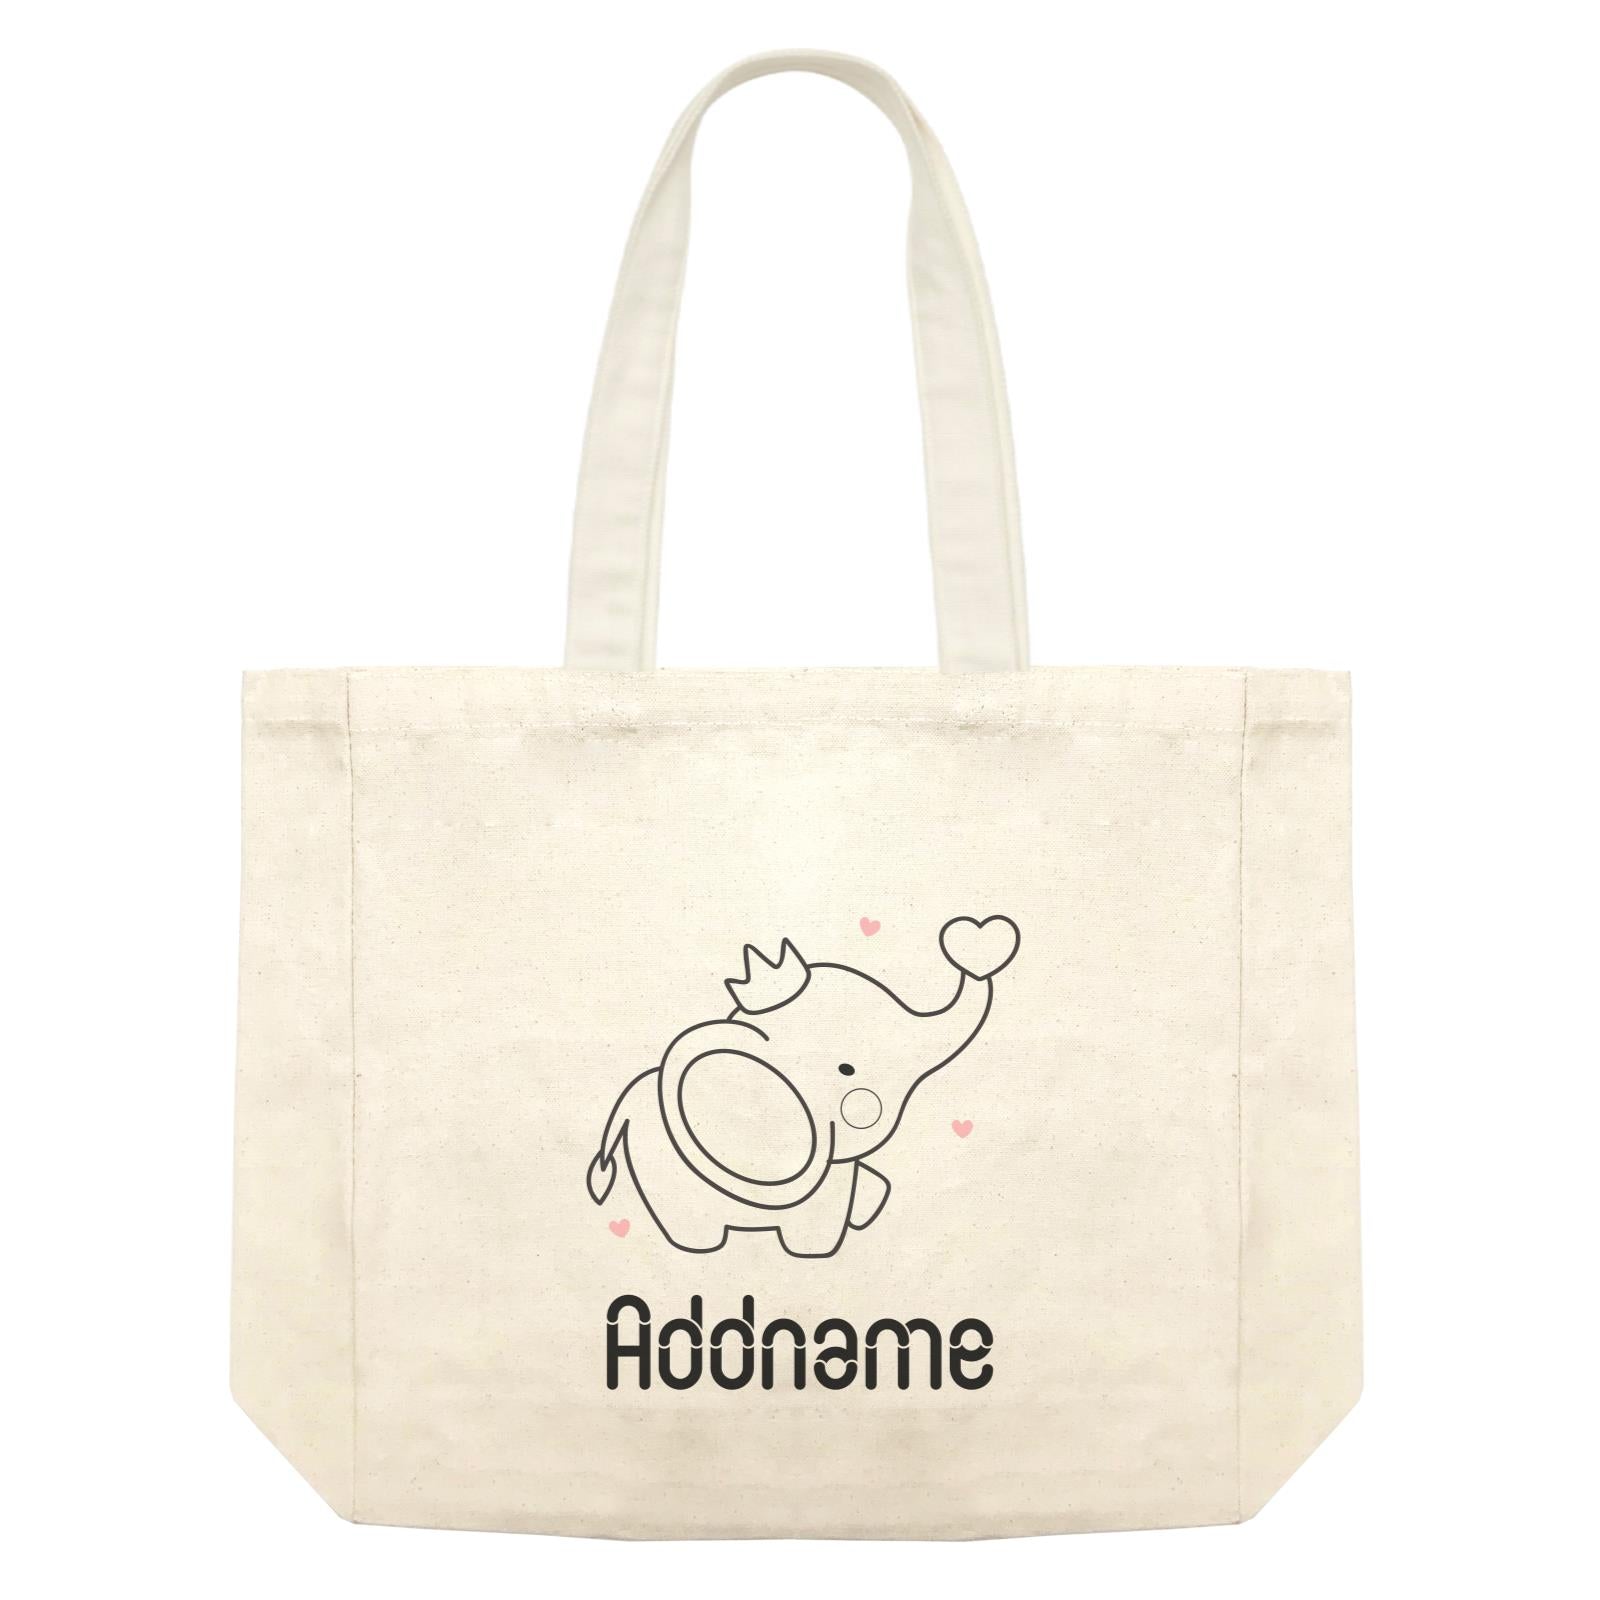 Coloring Outline Cute Hand Drawn Animals Elephants Baby Elephants With Heart And Crown Addname Shopping Bag